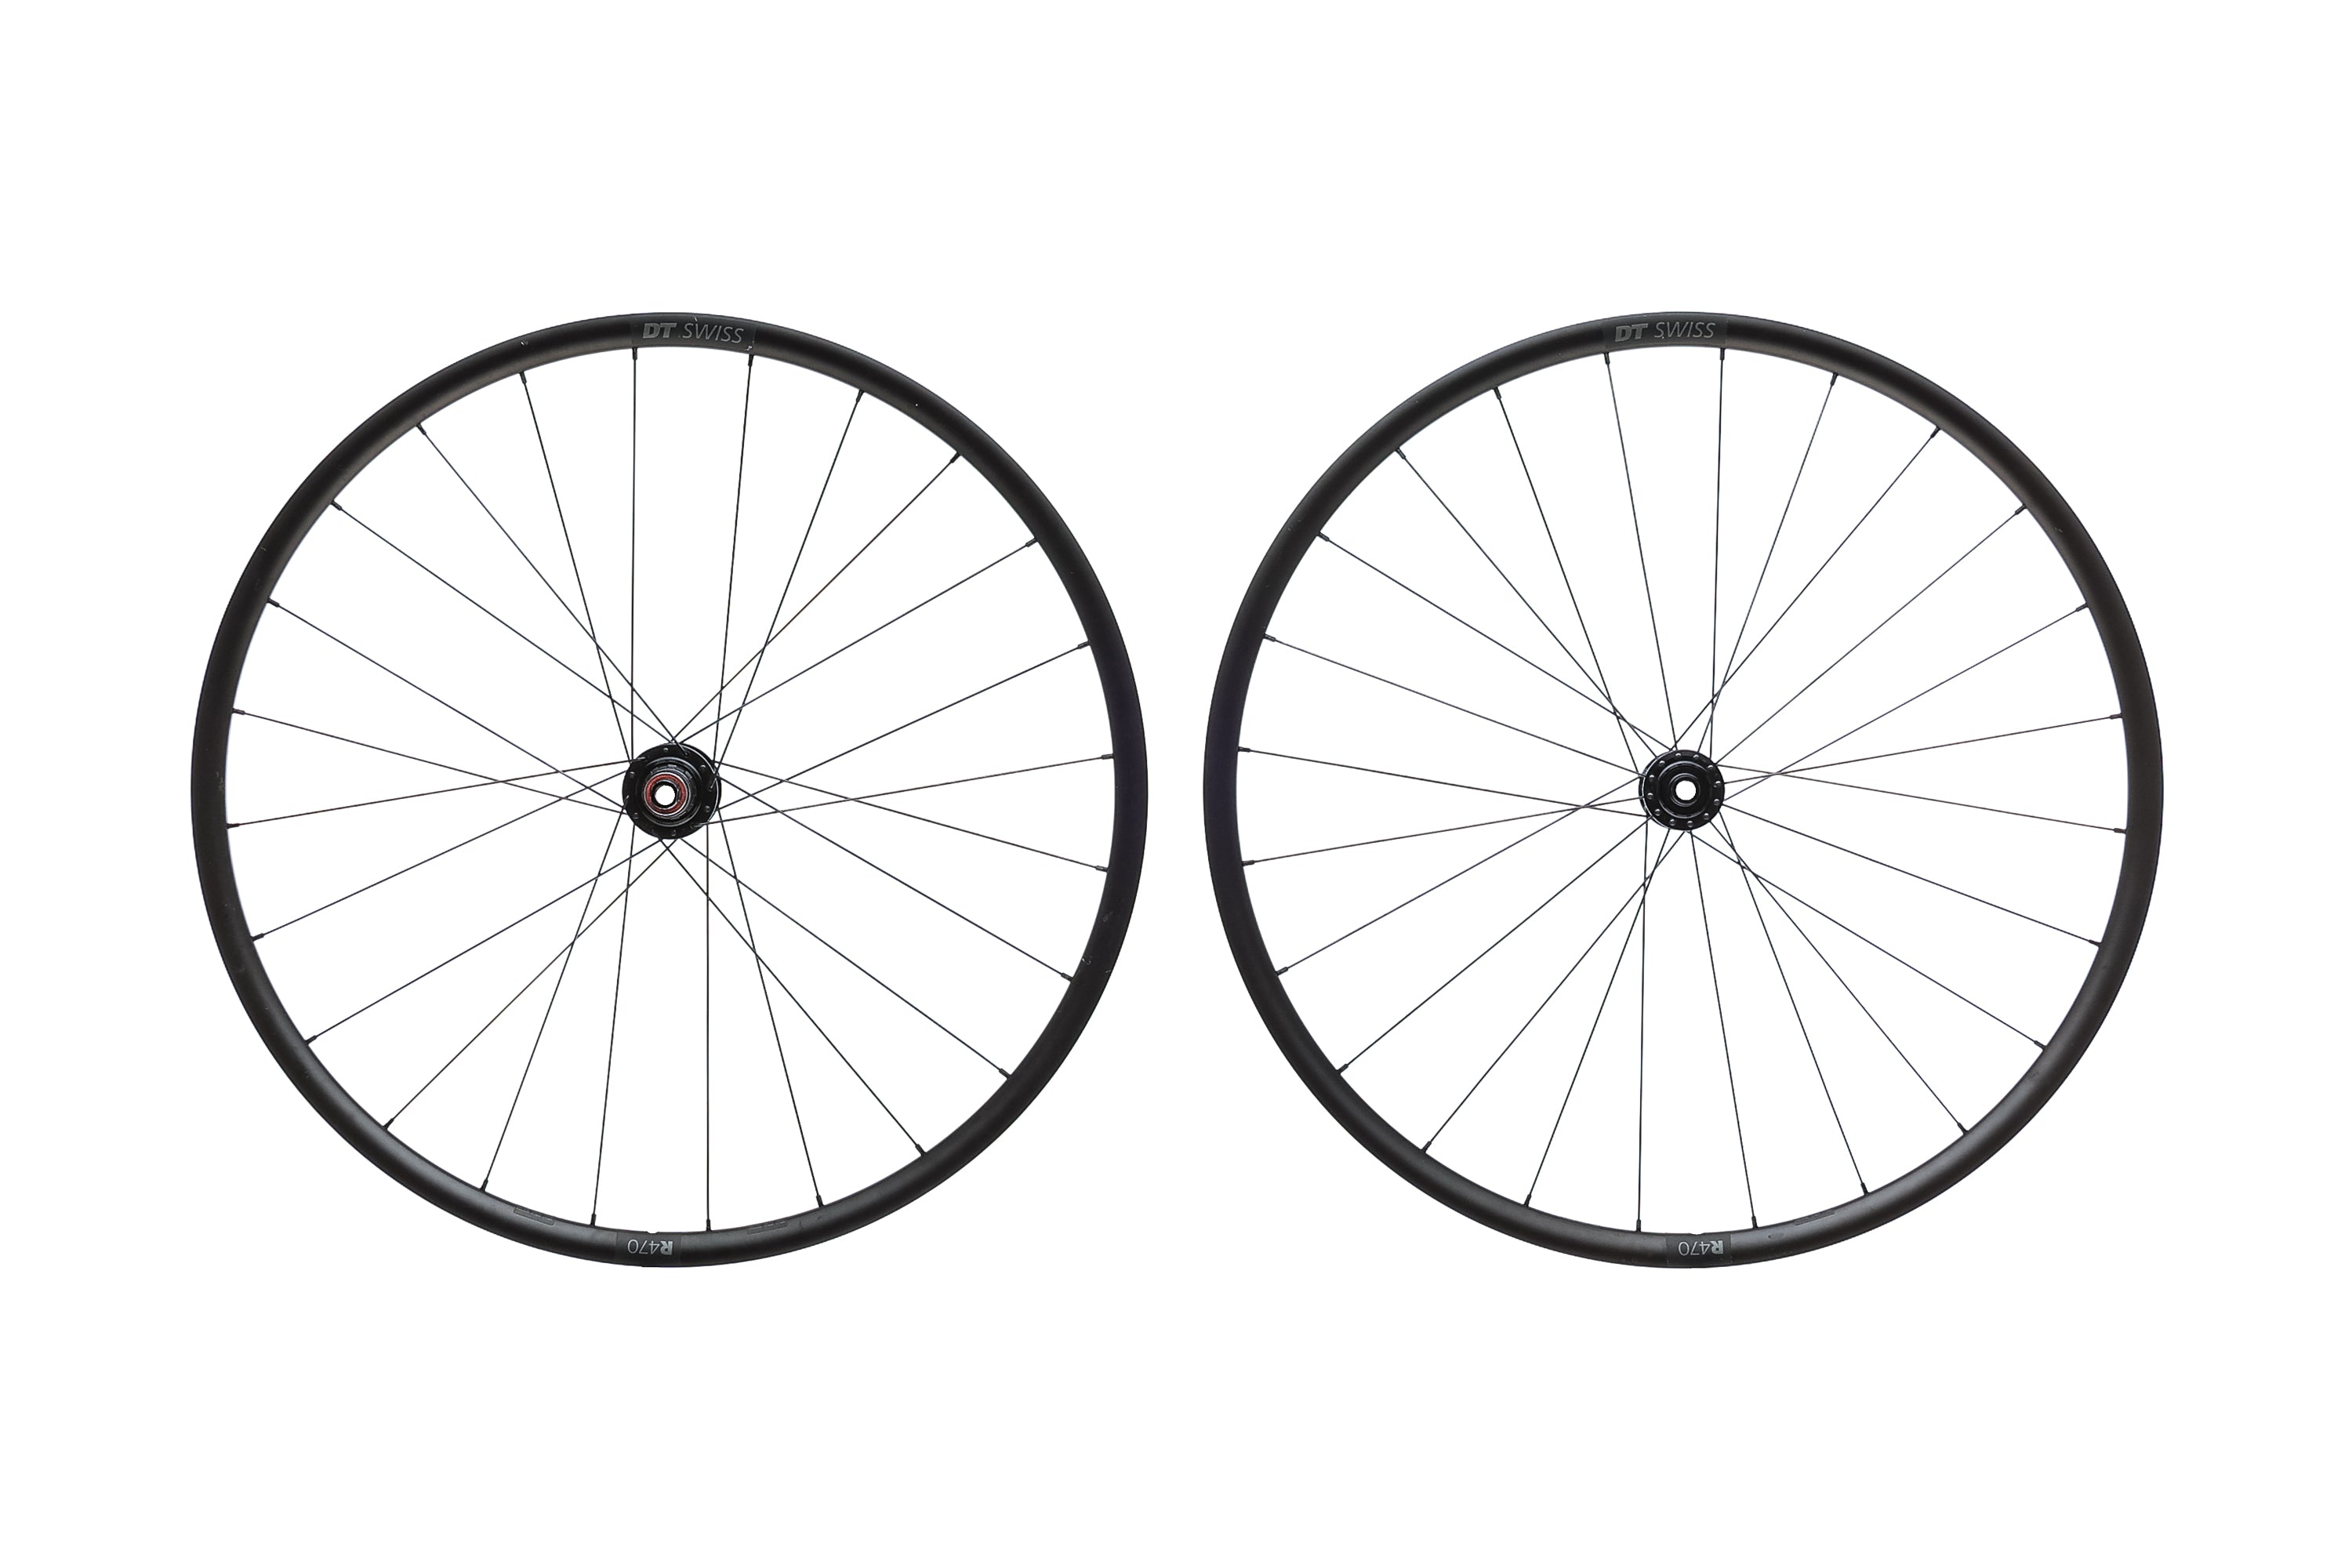 DT Swiss R 470 Wheelsets - Weight, Review, Specs, Price | Rims